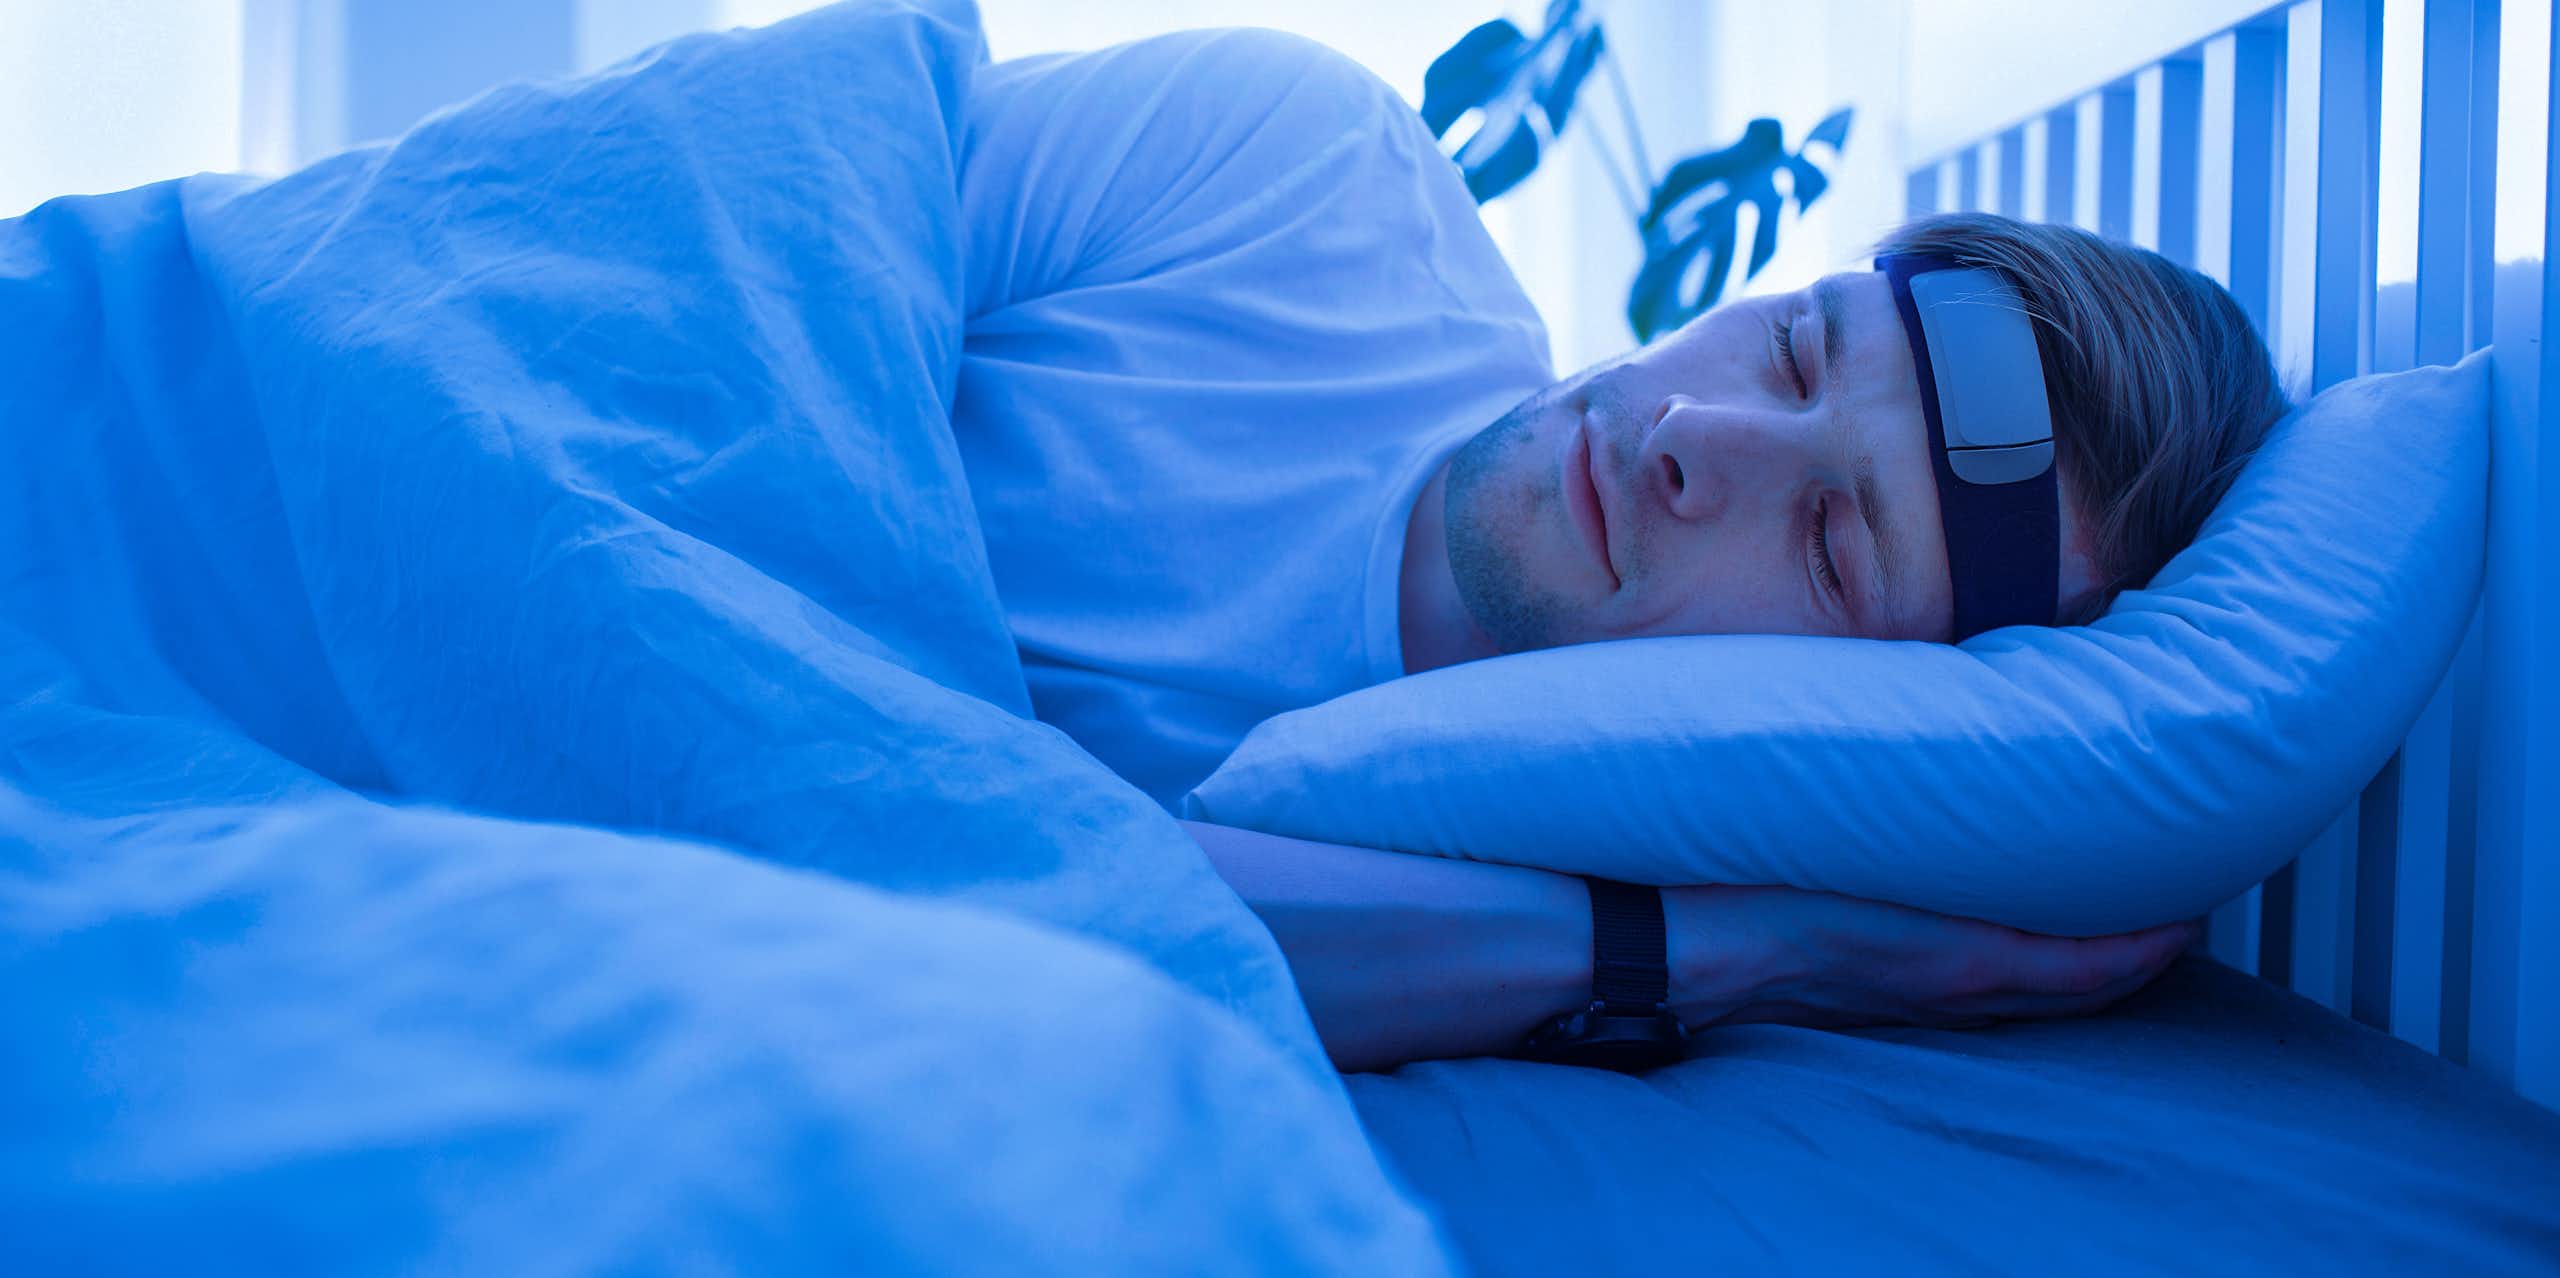 A man sleeping in a blue lit room with a smart headband and a wristwatch.